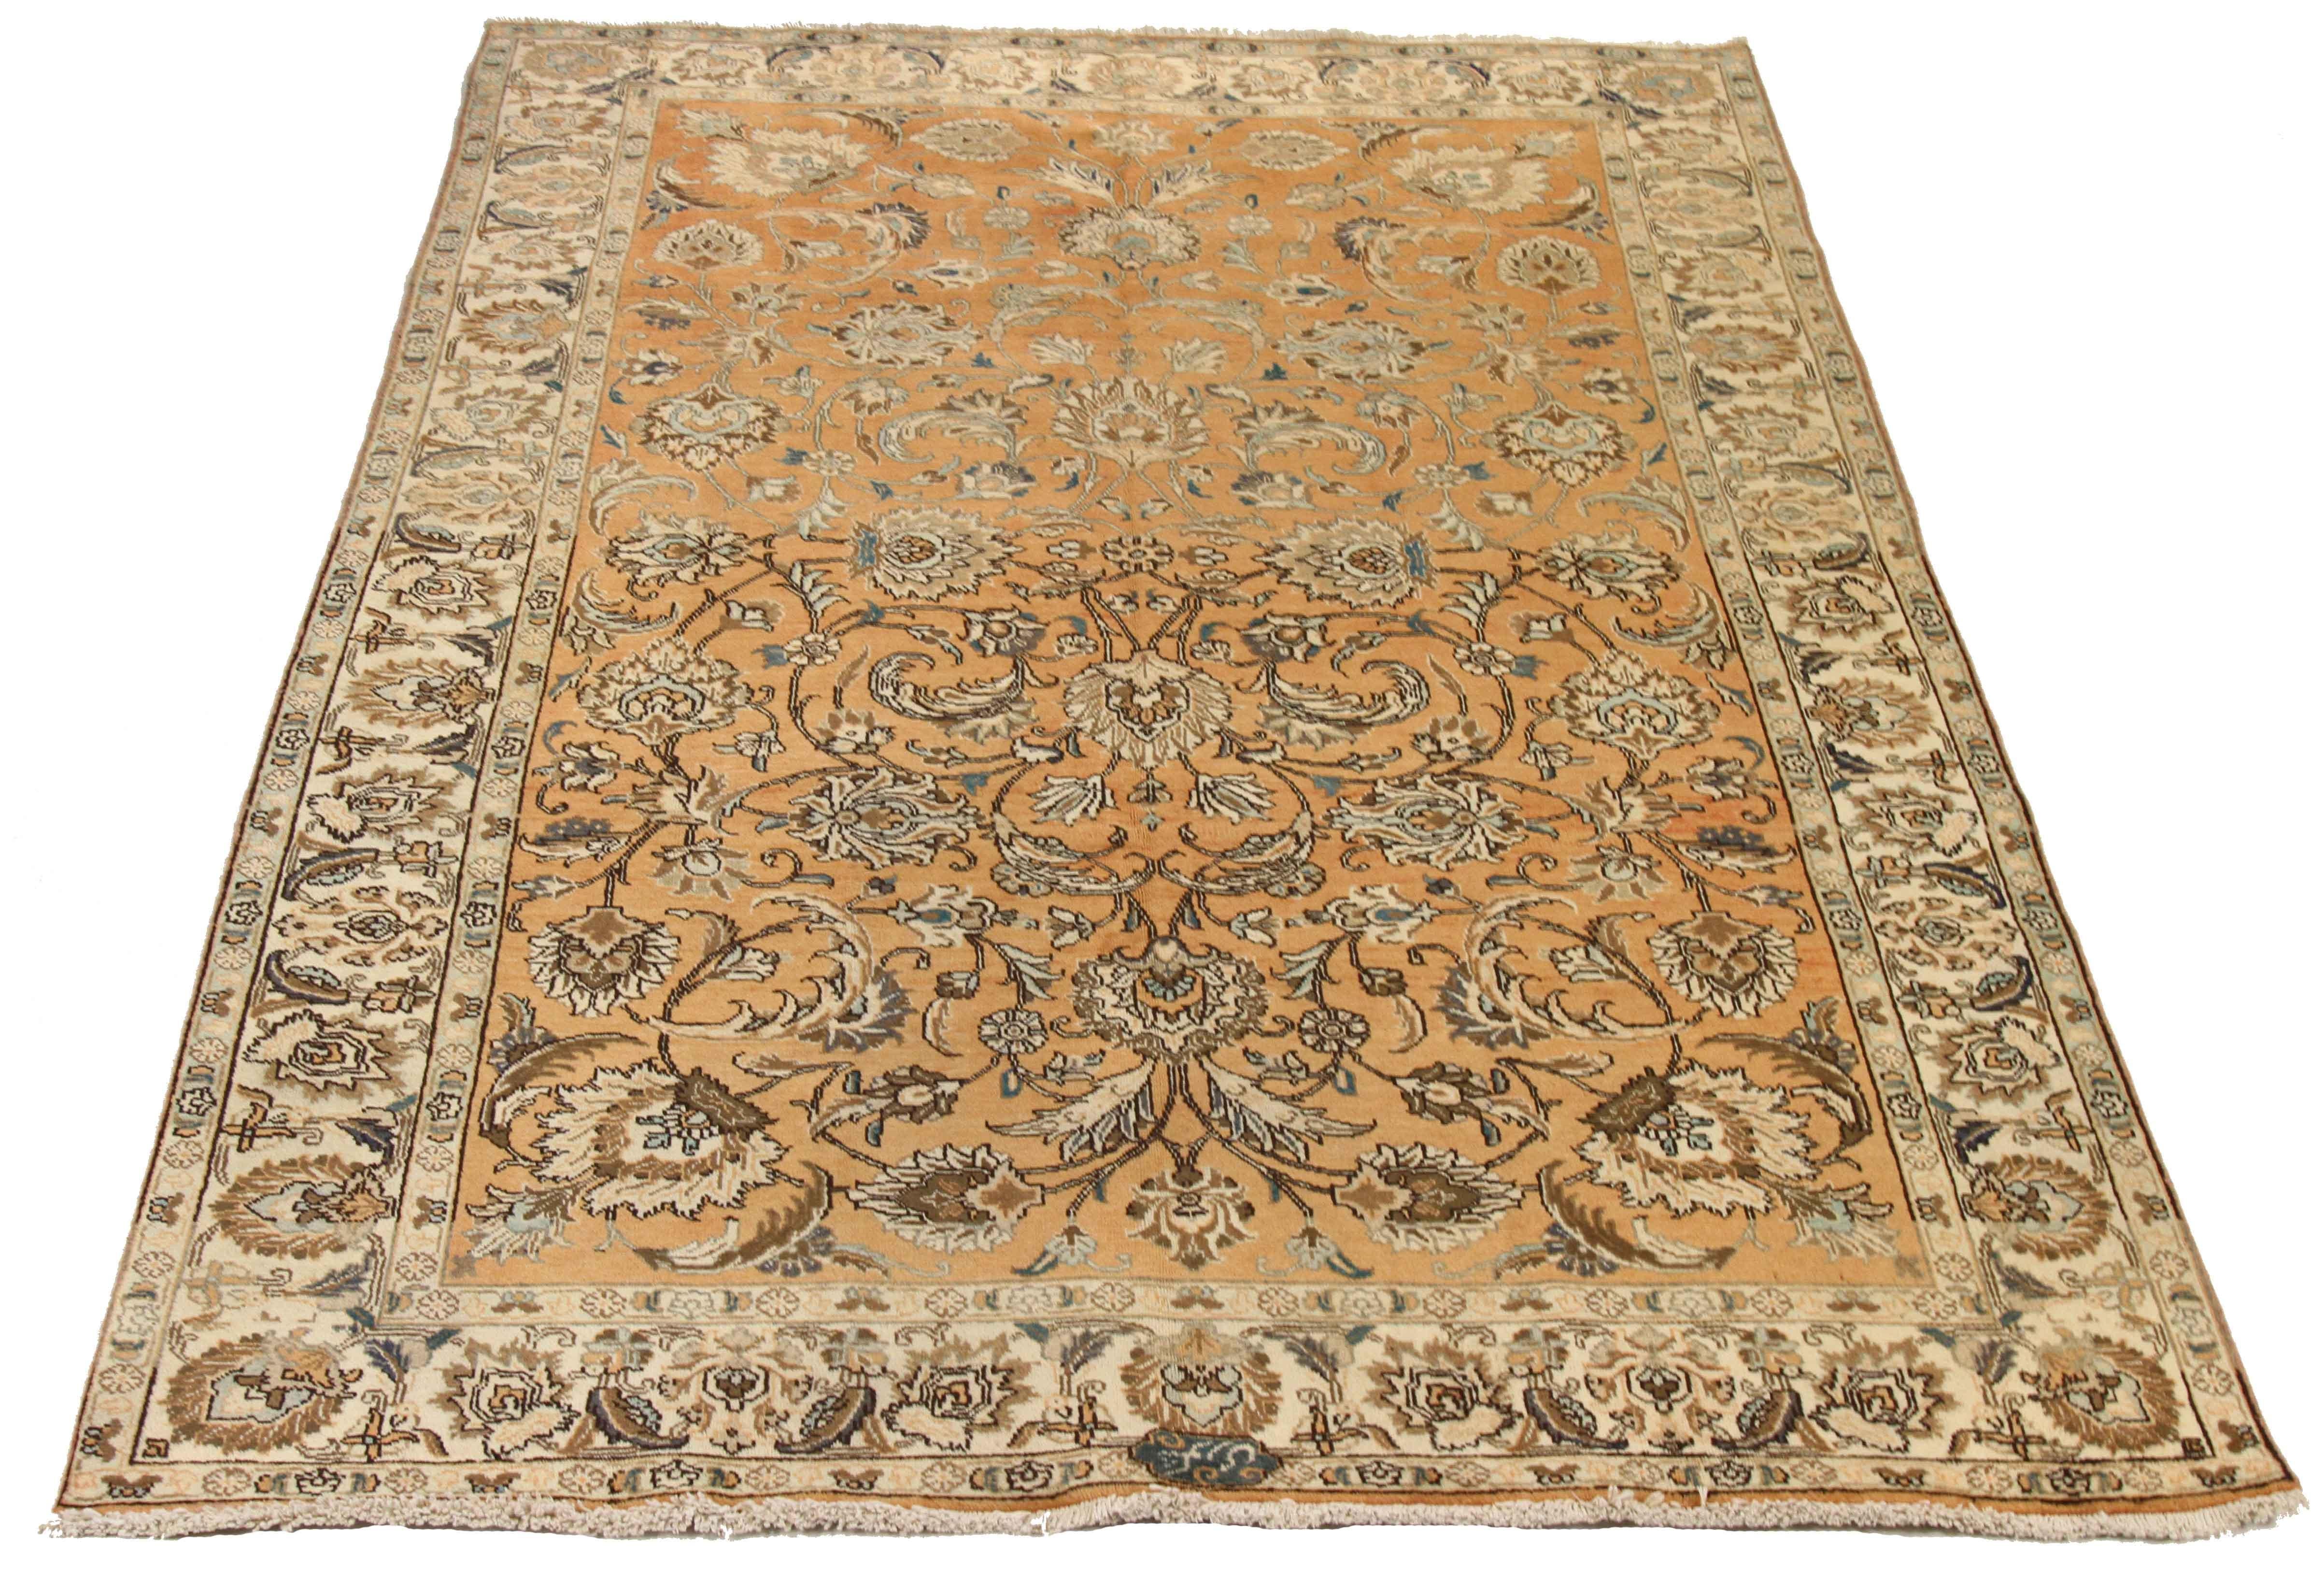 Hand-Woven Antique Persian Tabriz Rug with Brown & Ivory Flower Motifs on Orange Center Fie For Sale